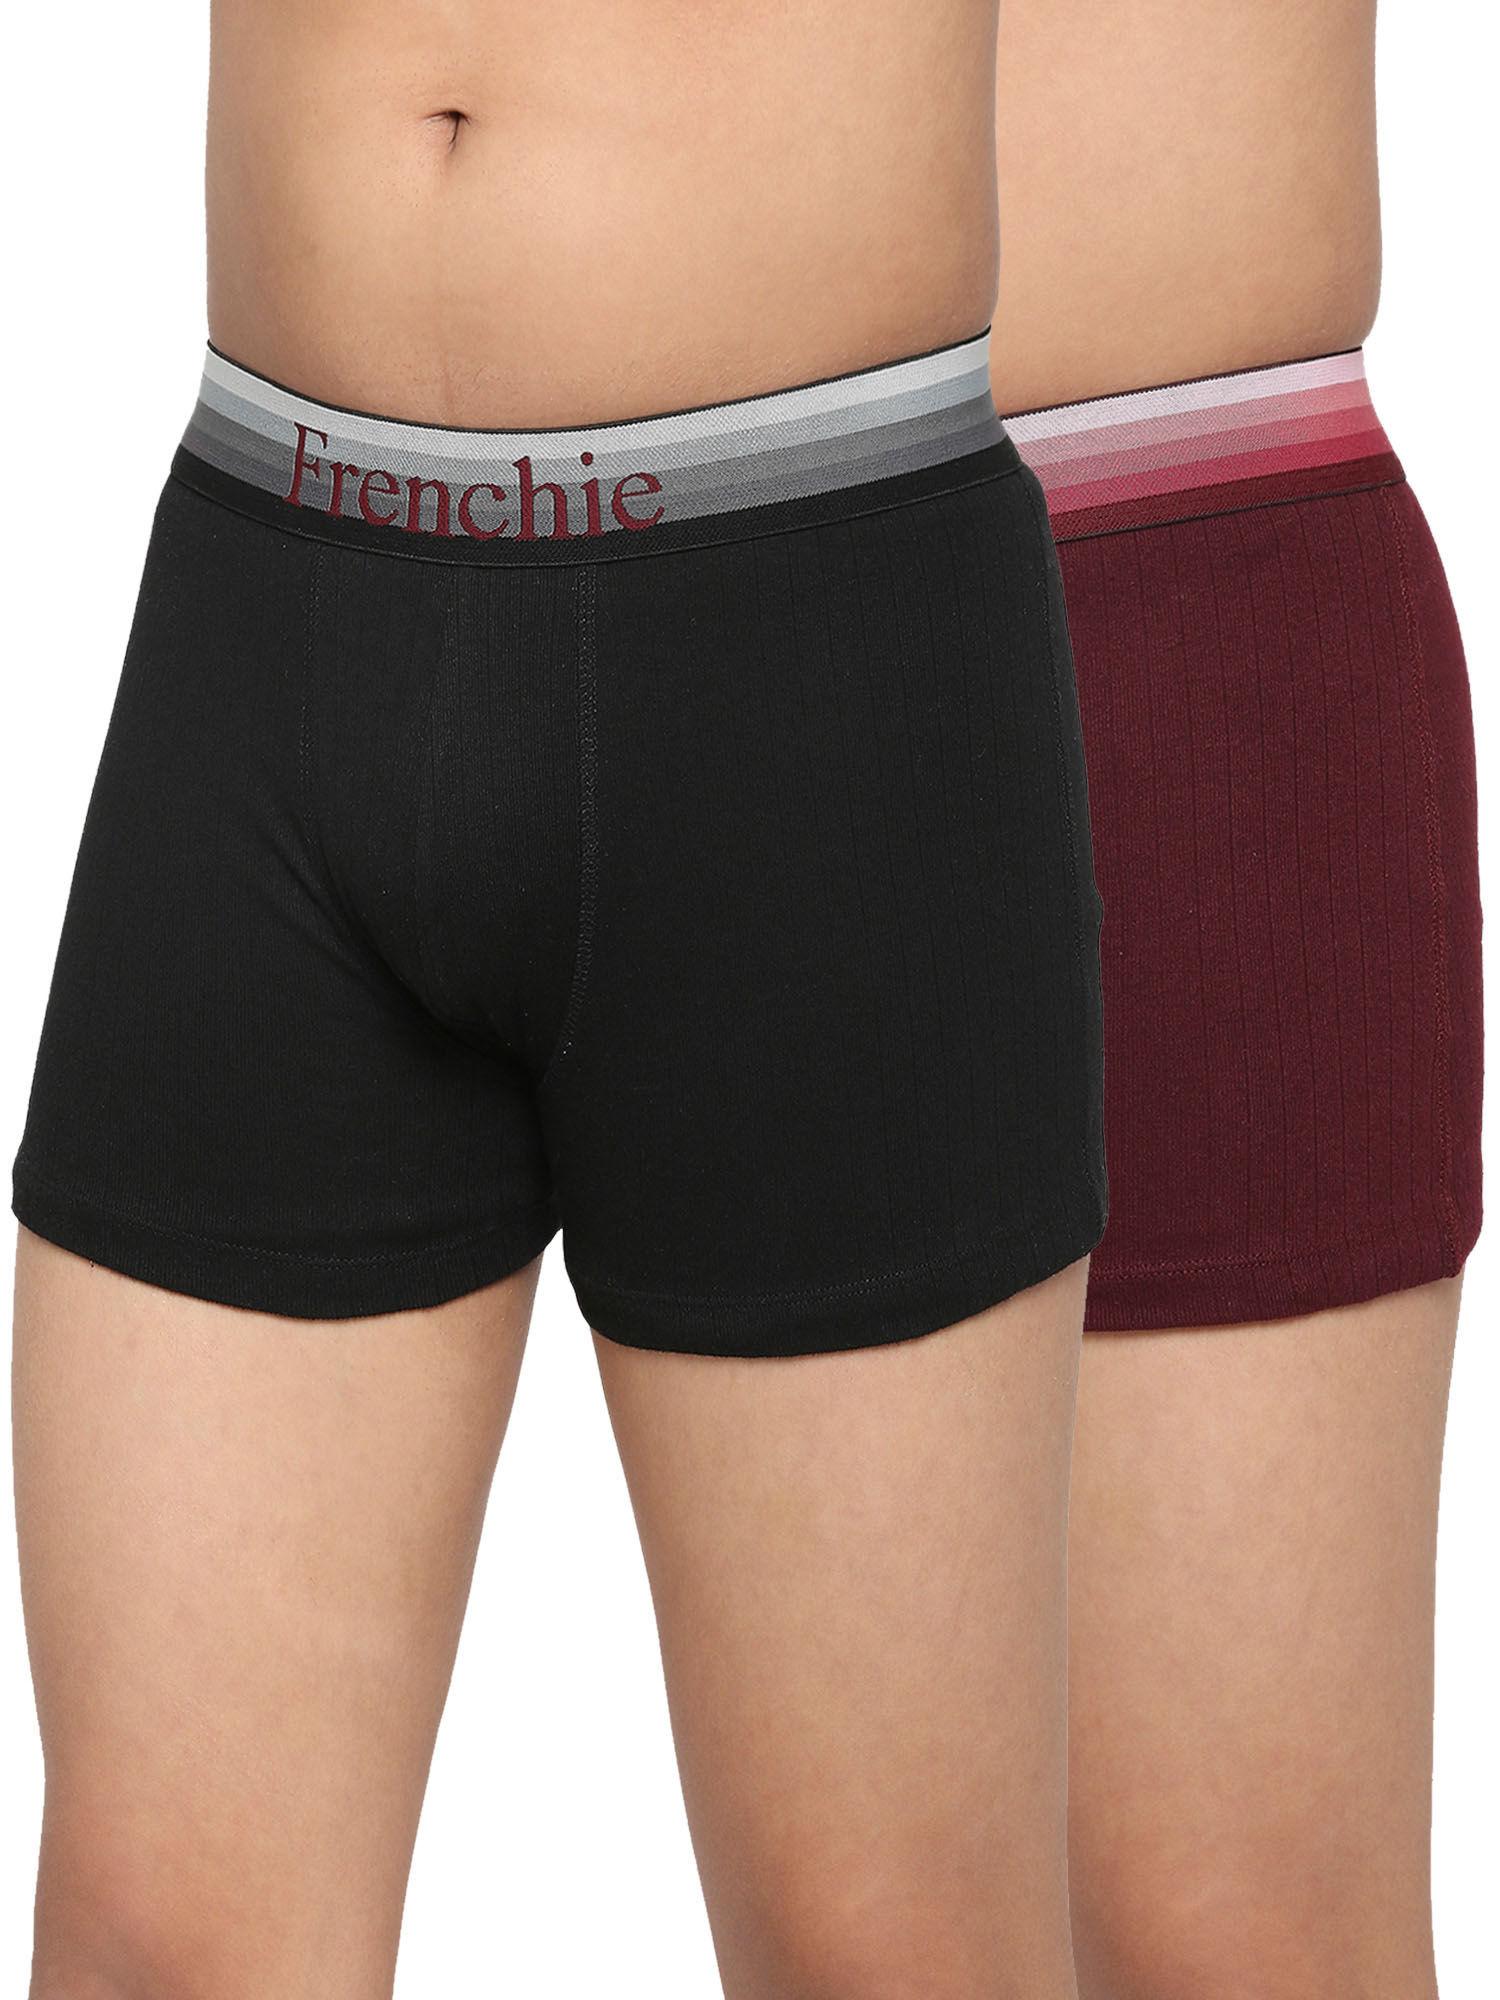 teenagers-cotton-trunk-black-and-wine-(pack-of-2)